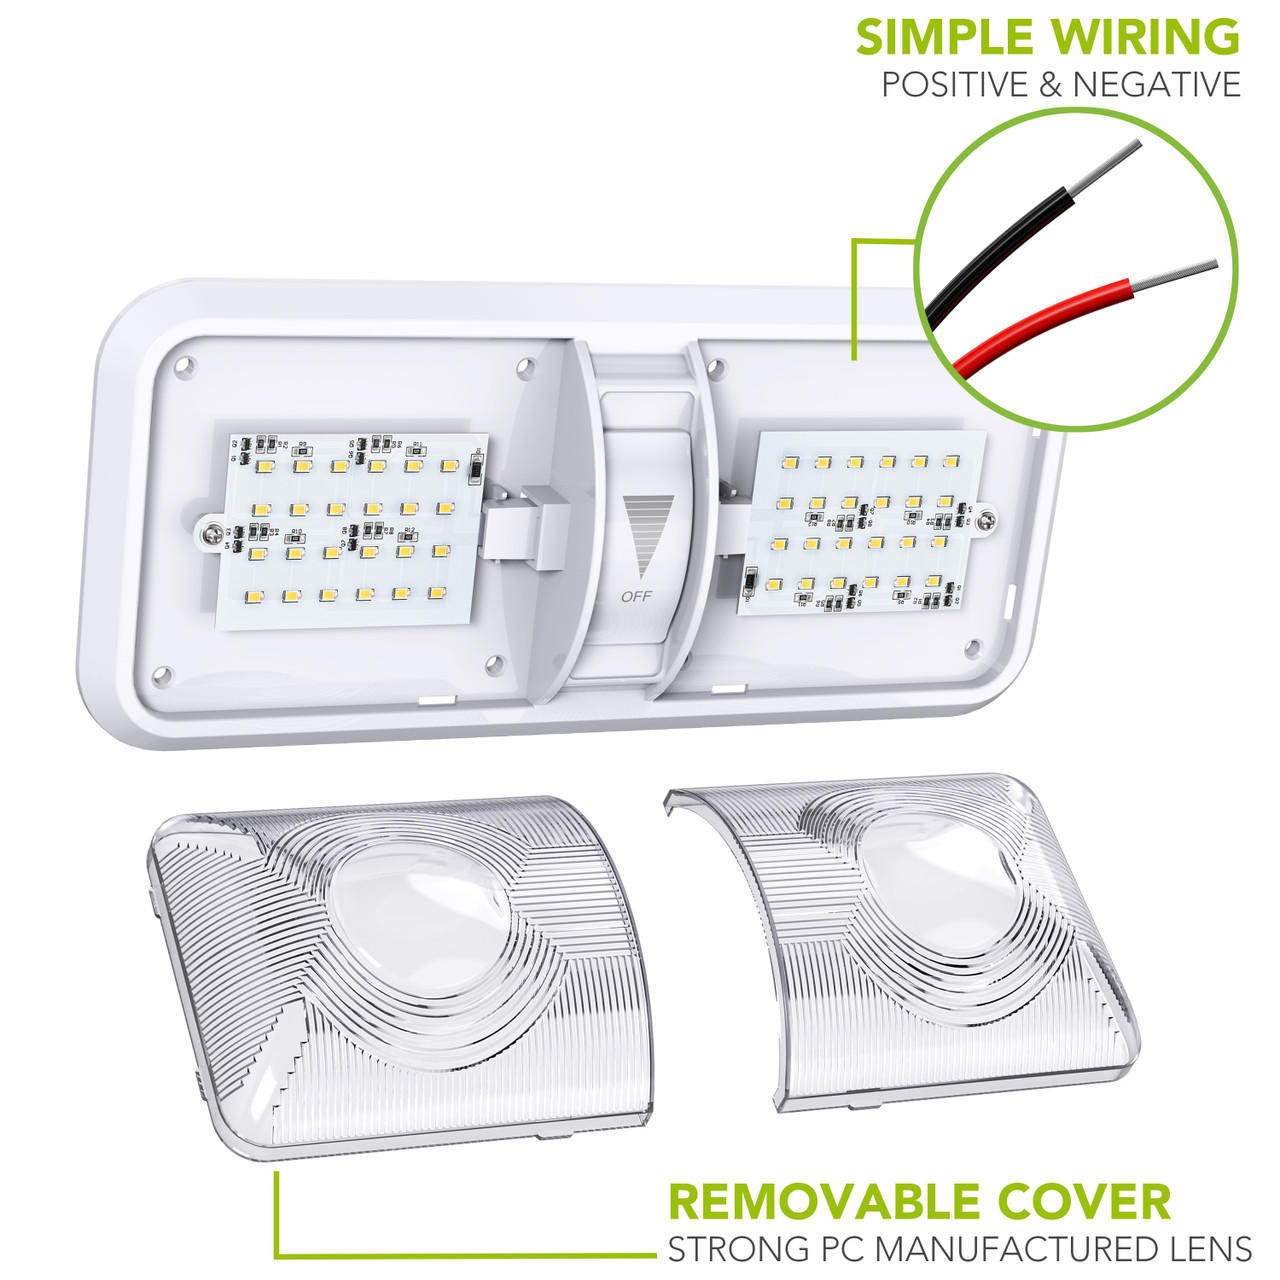 Leisure LED RV LED Ceiling Double Dome Light Fixture with Dimmer Switch Interior Lighting for Car/RV/Trailer/Camper/Boat DC 12V 550 Lumens Natural White 4000-4500K 